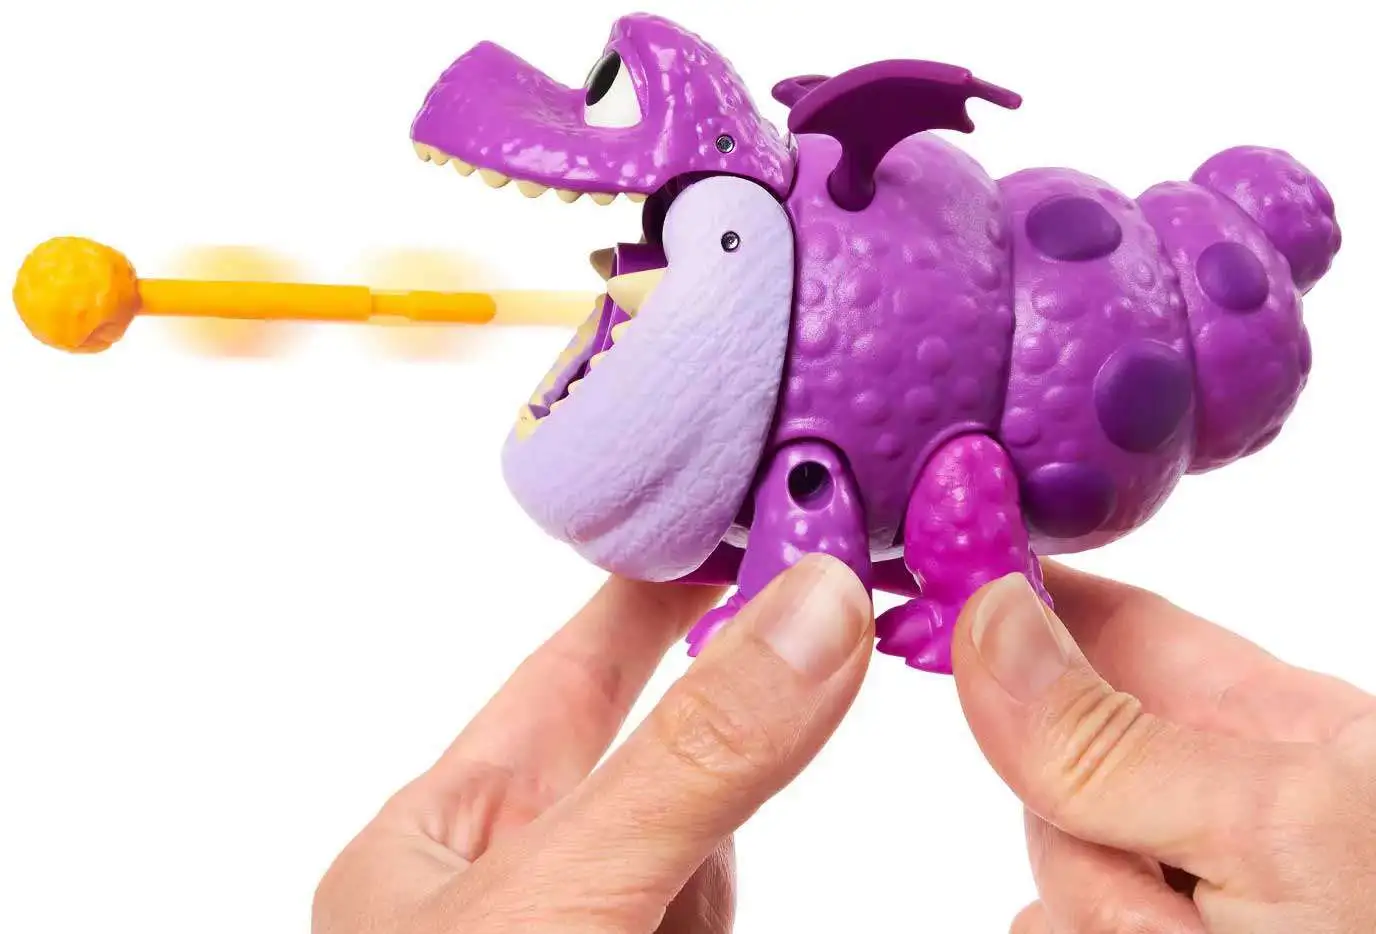 How to Train Your Dragon DreamWorks Dragons Burple Rescue Riders 3 inches 